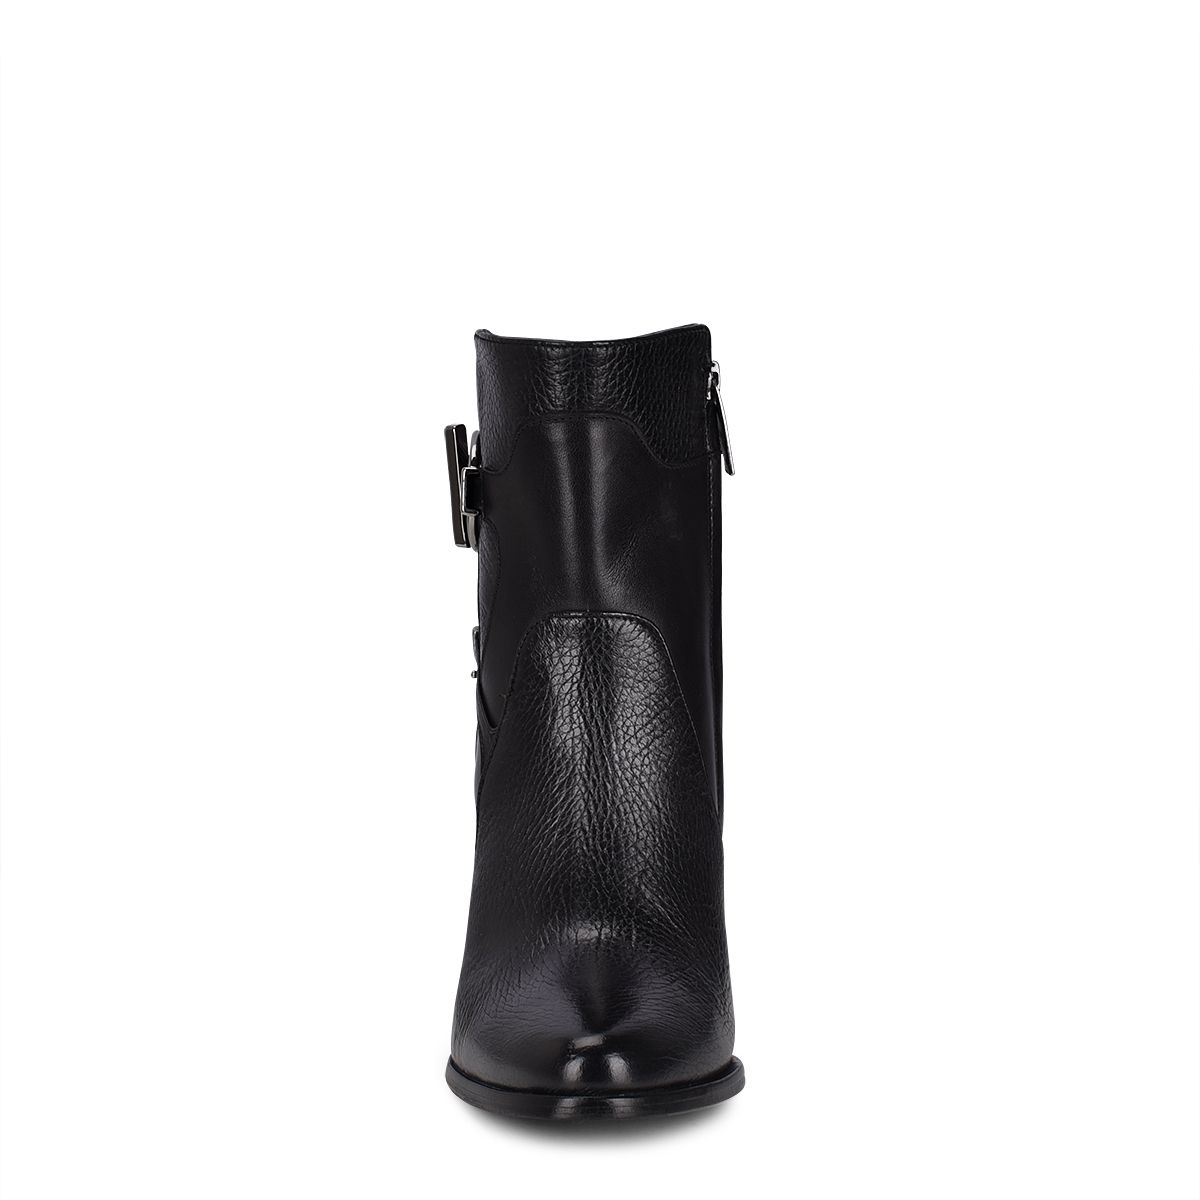 3G5VNTS - Franco Cuadra black casual fashion deer leather ankle boots for women-Kuet.us